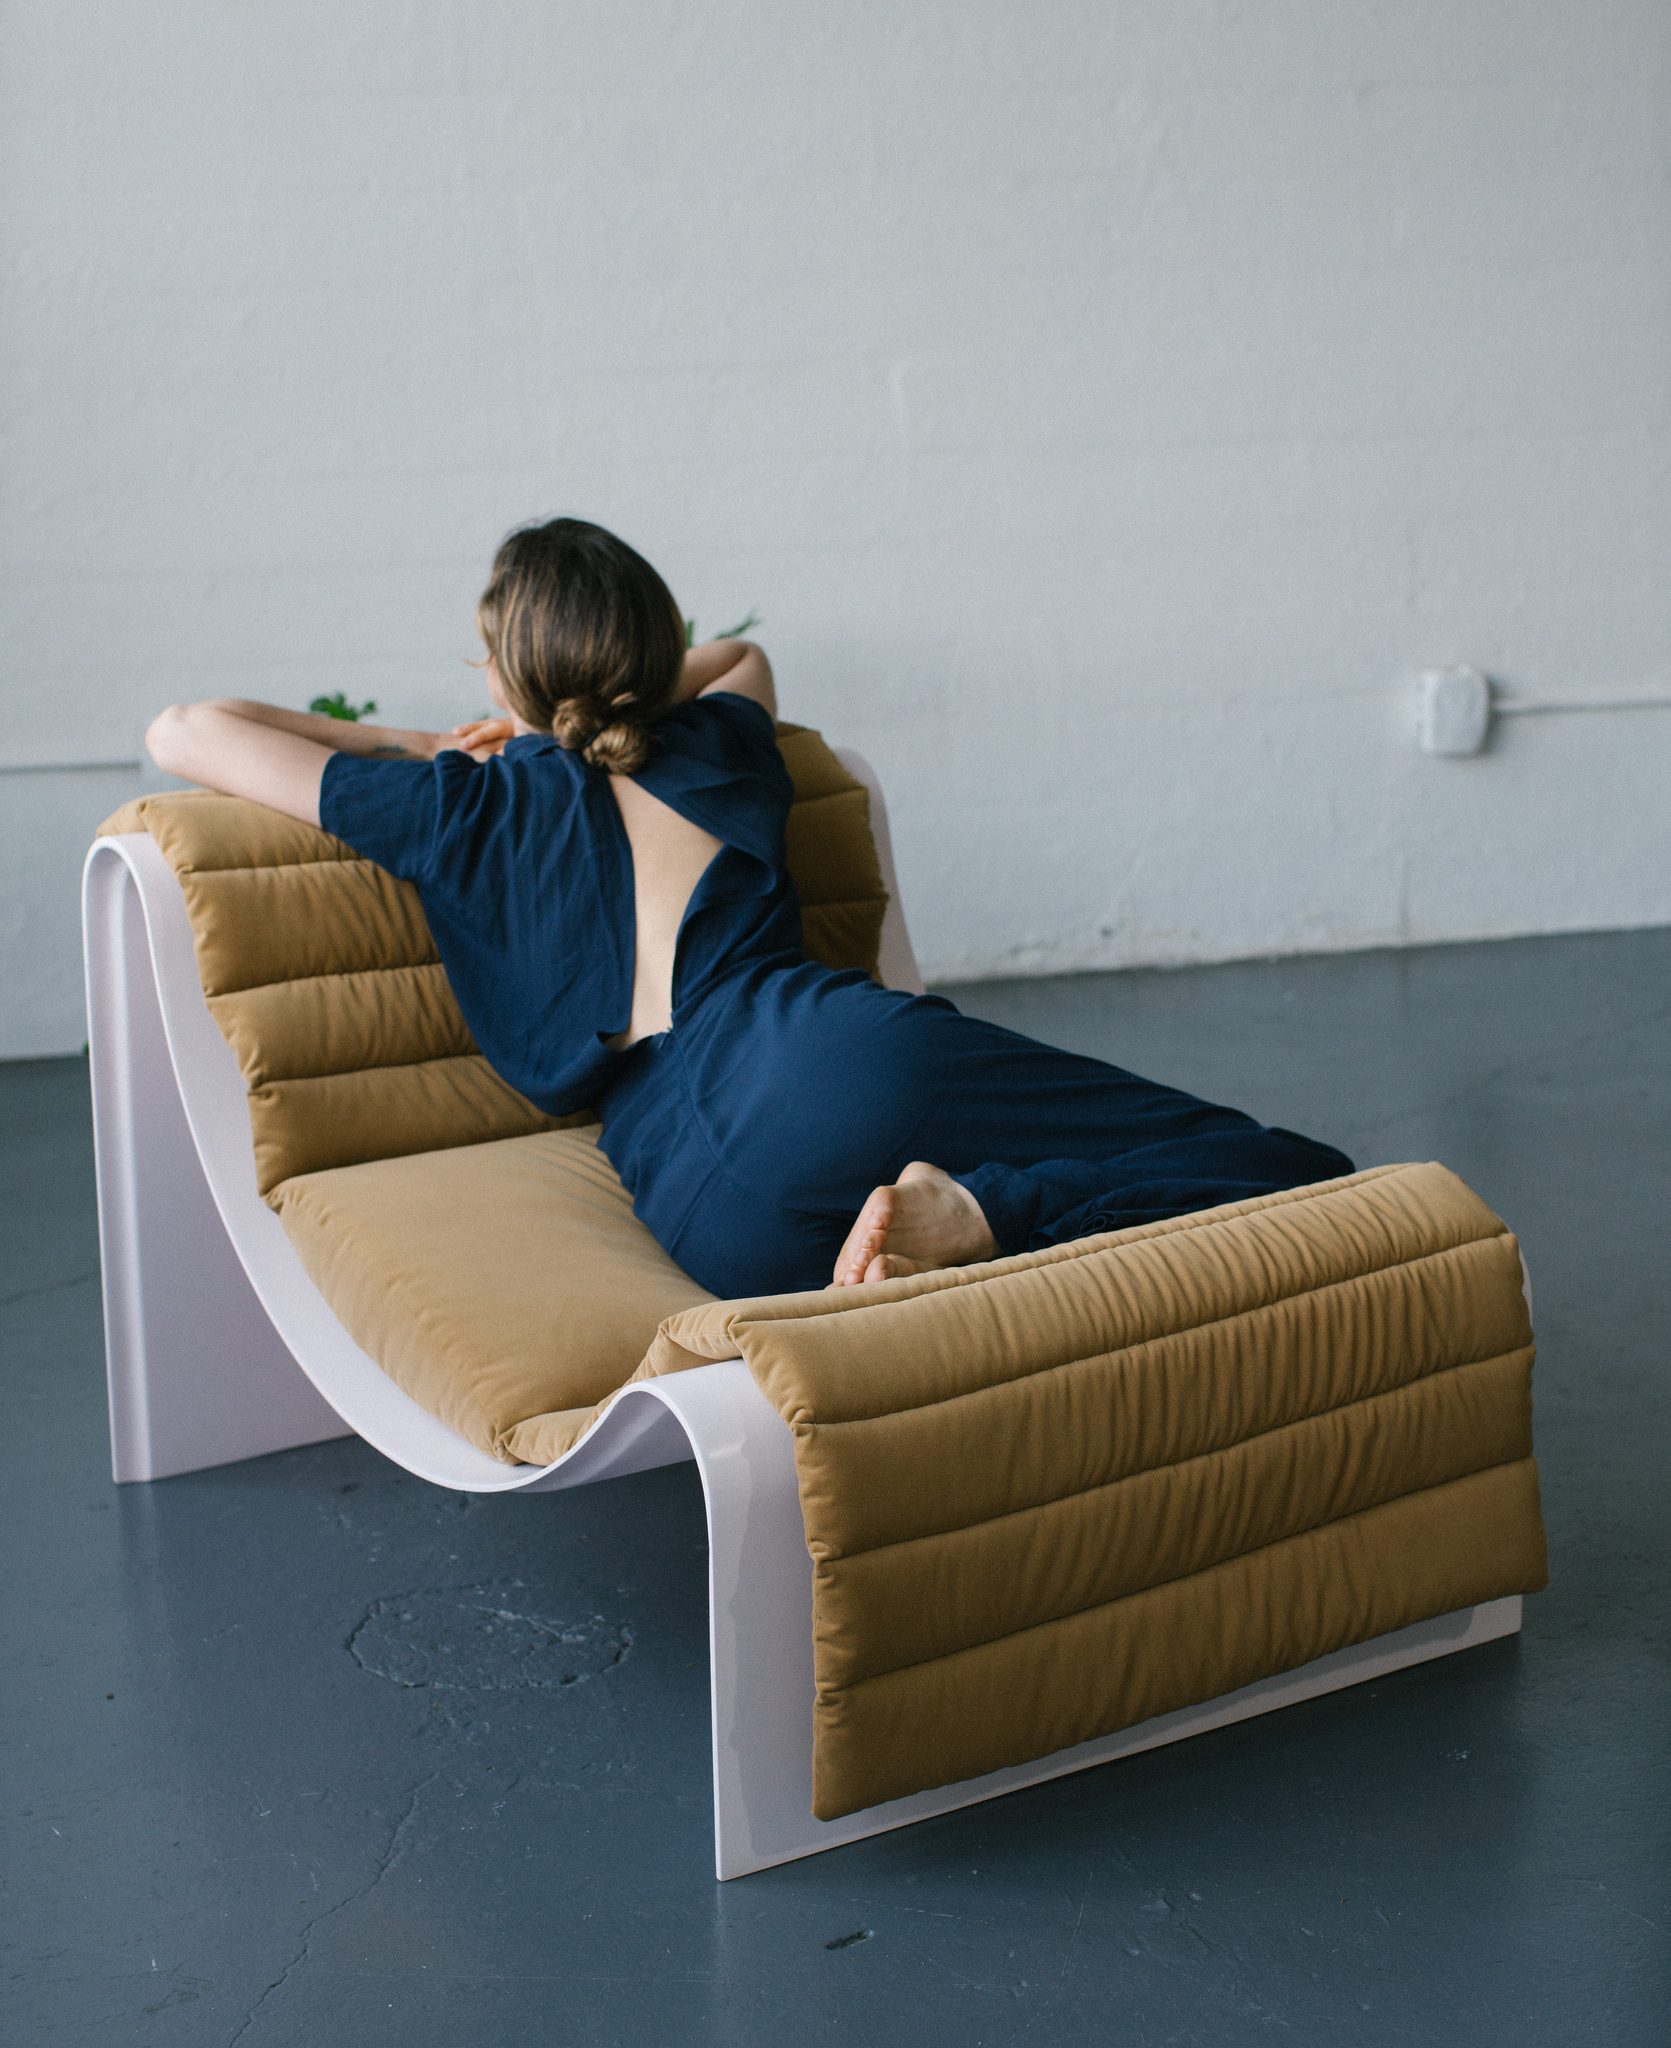 This is a Fiberglass Lounge Chair in pink for Indoor-Outdoor use designed by Asa Pingree and called the Knockabout.